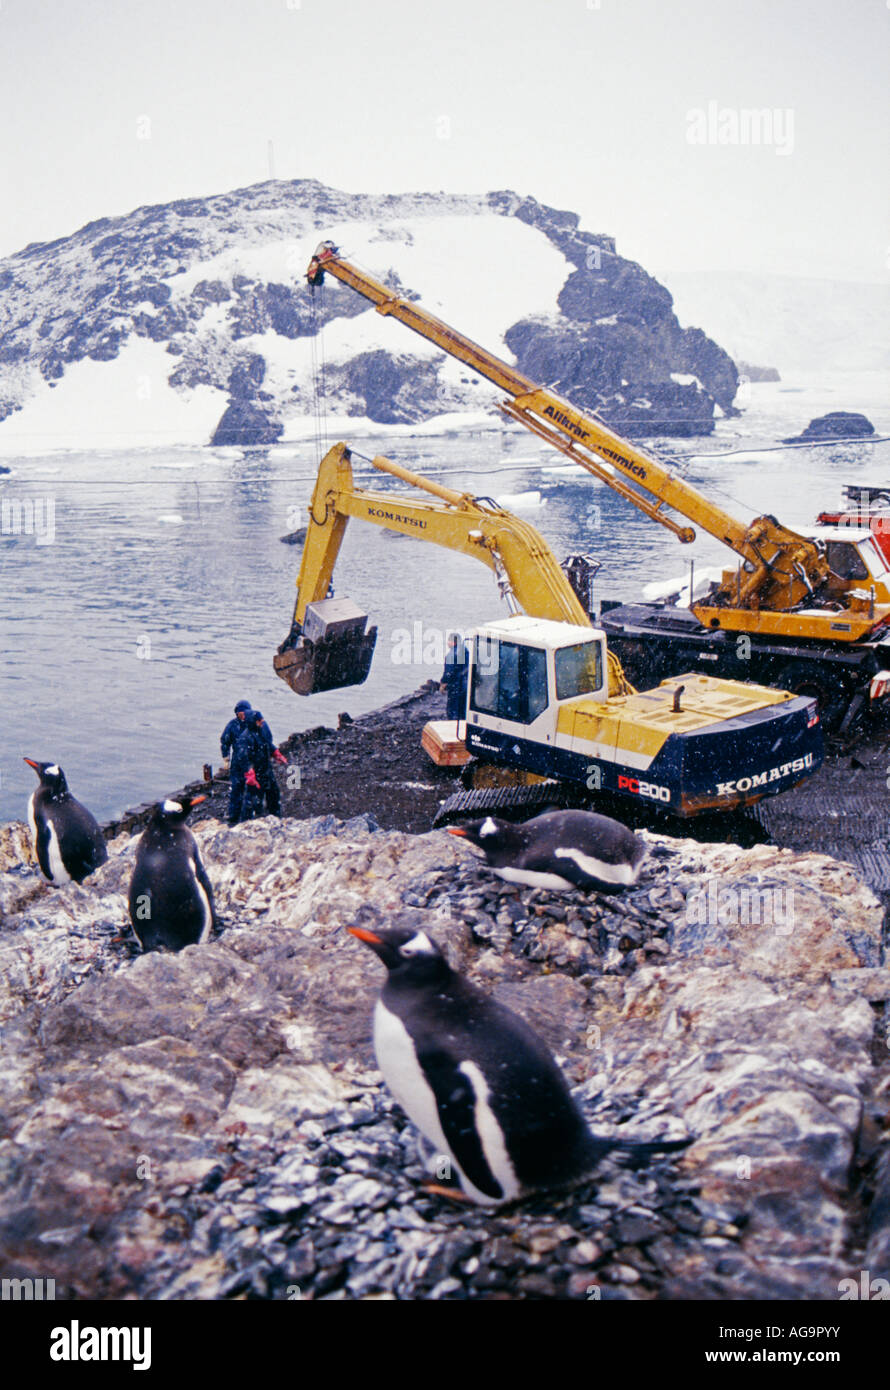 Antarctica Gentoo penguins Pygoscelis papua breeding on Chilean base called Carvajal with crane in background Stock Photo